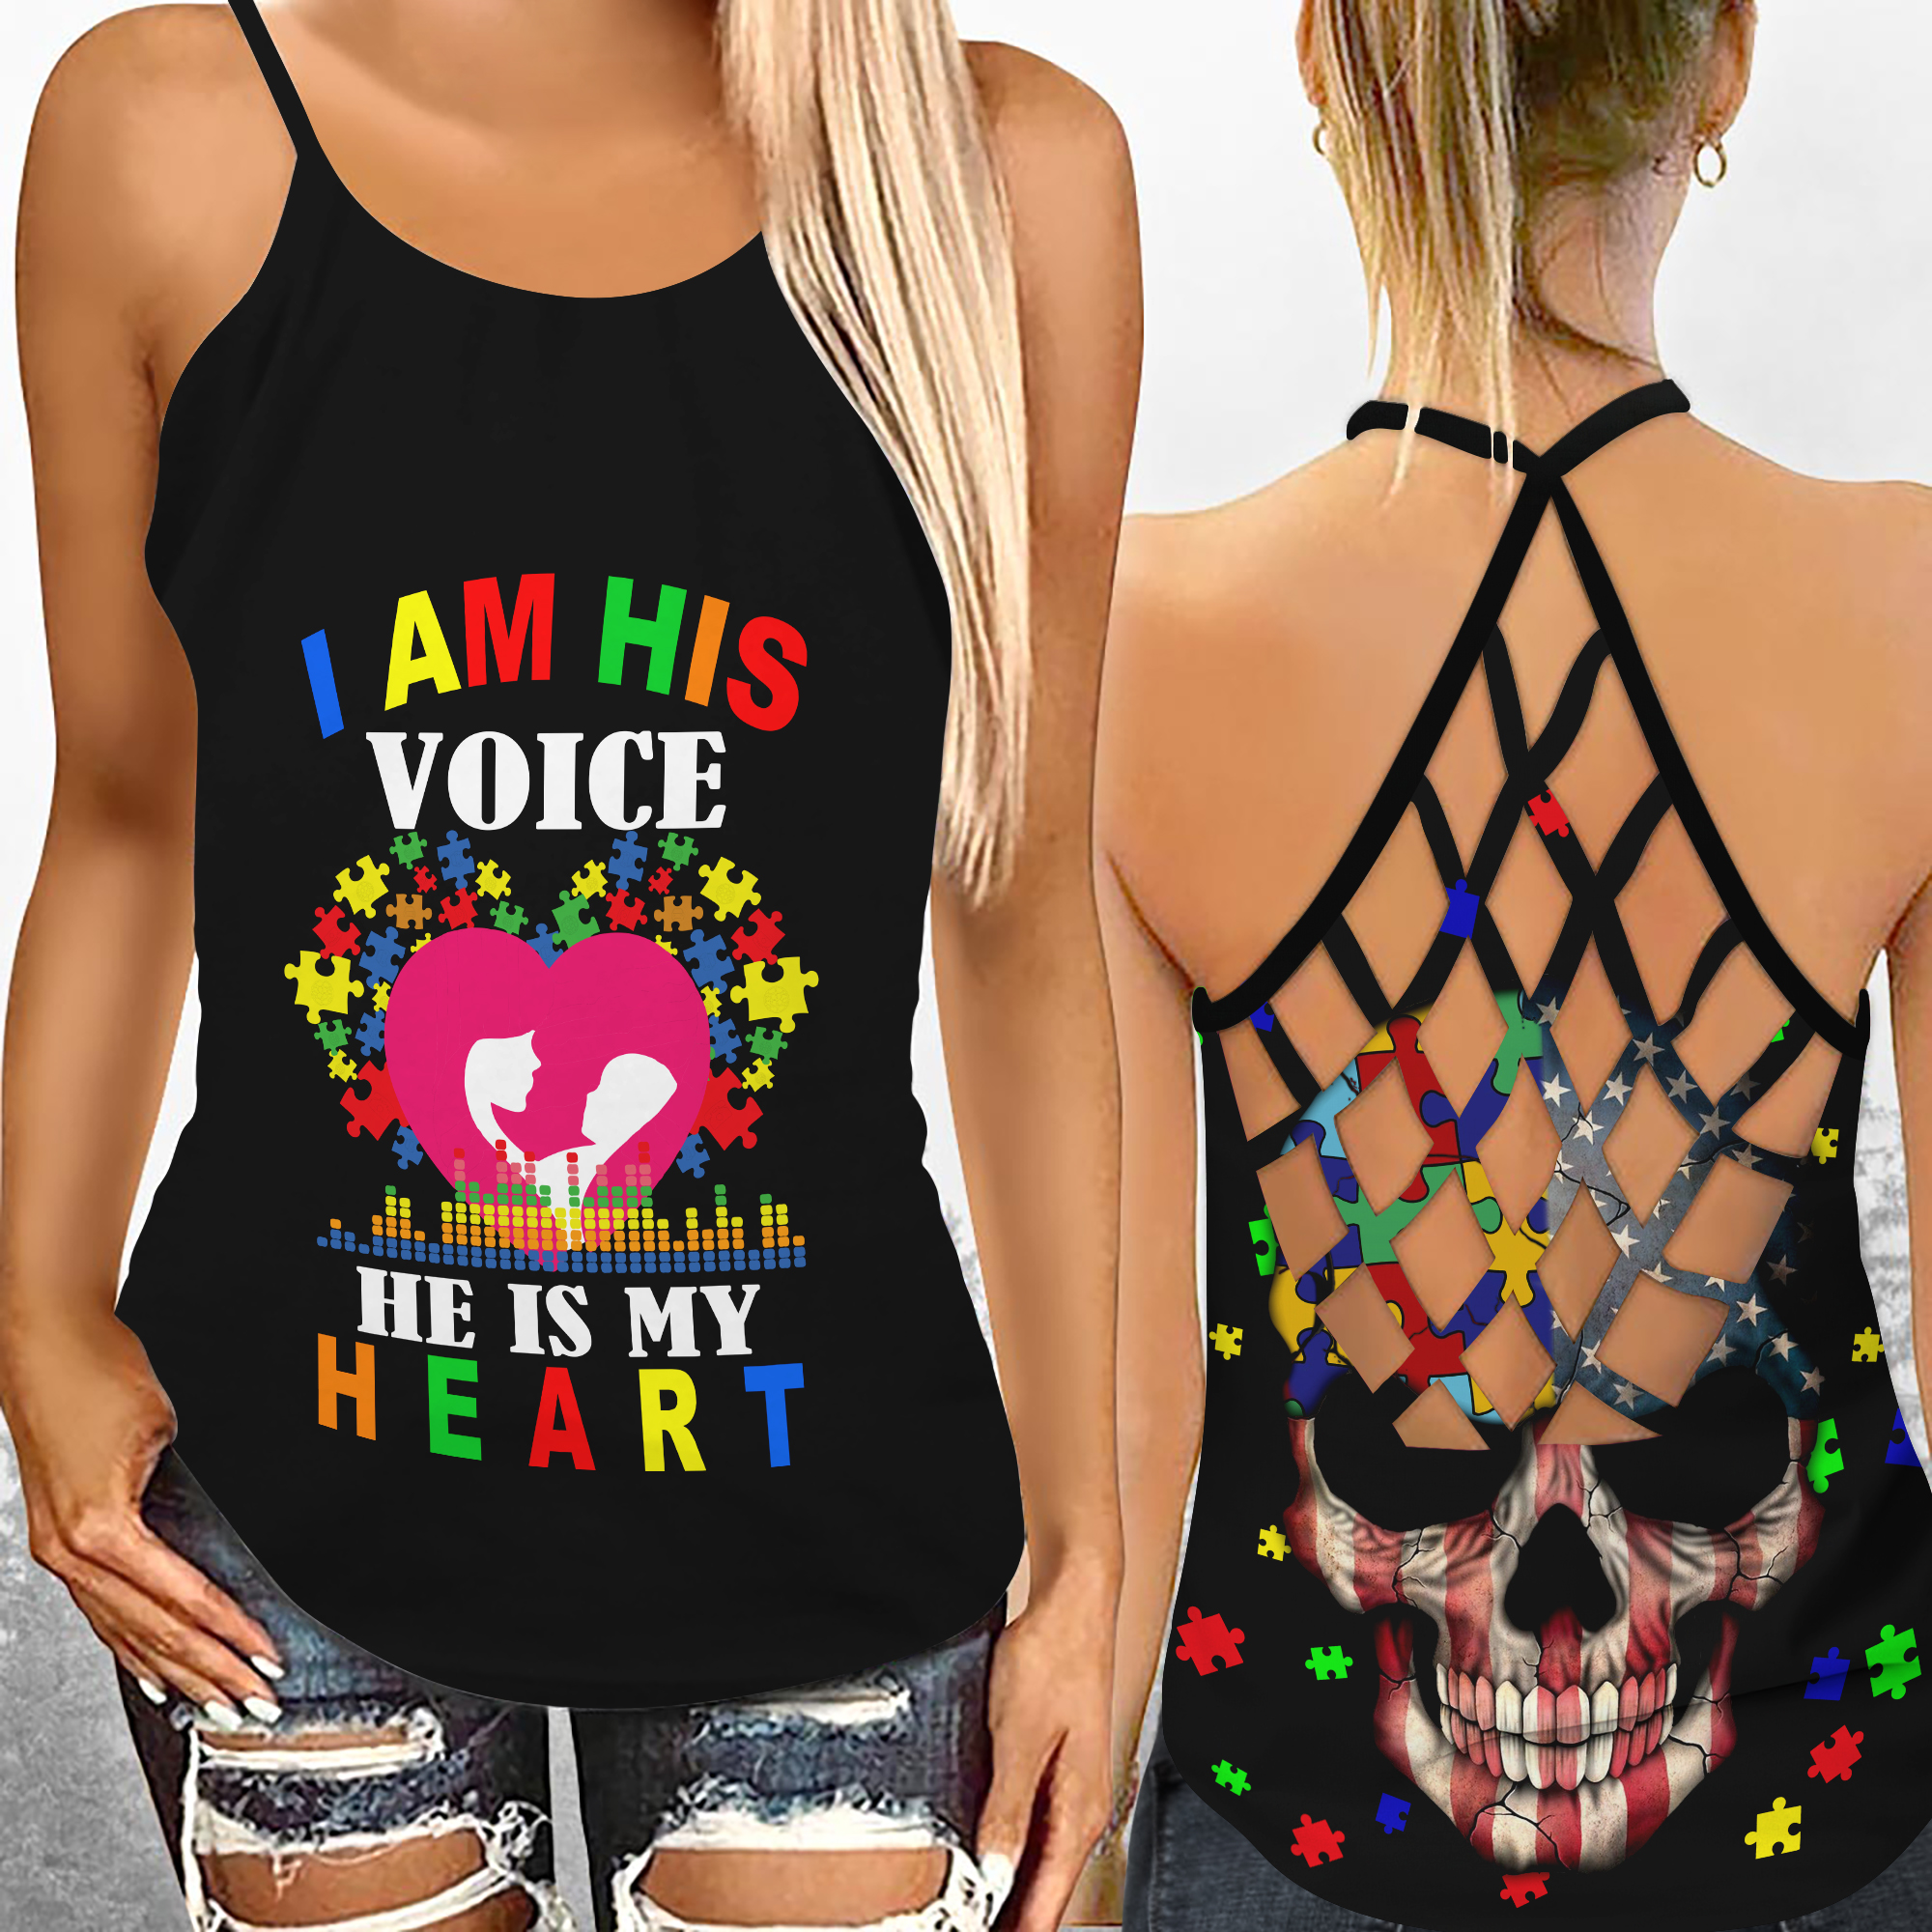 I am his voice he is my heart criss-cross open back camisole tank top – Saleoff 210521